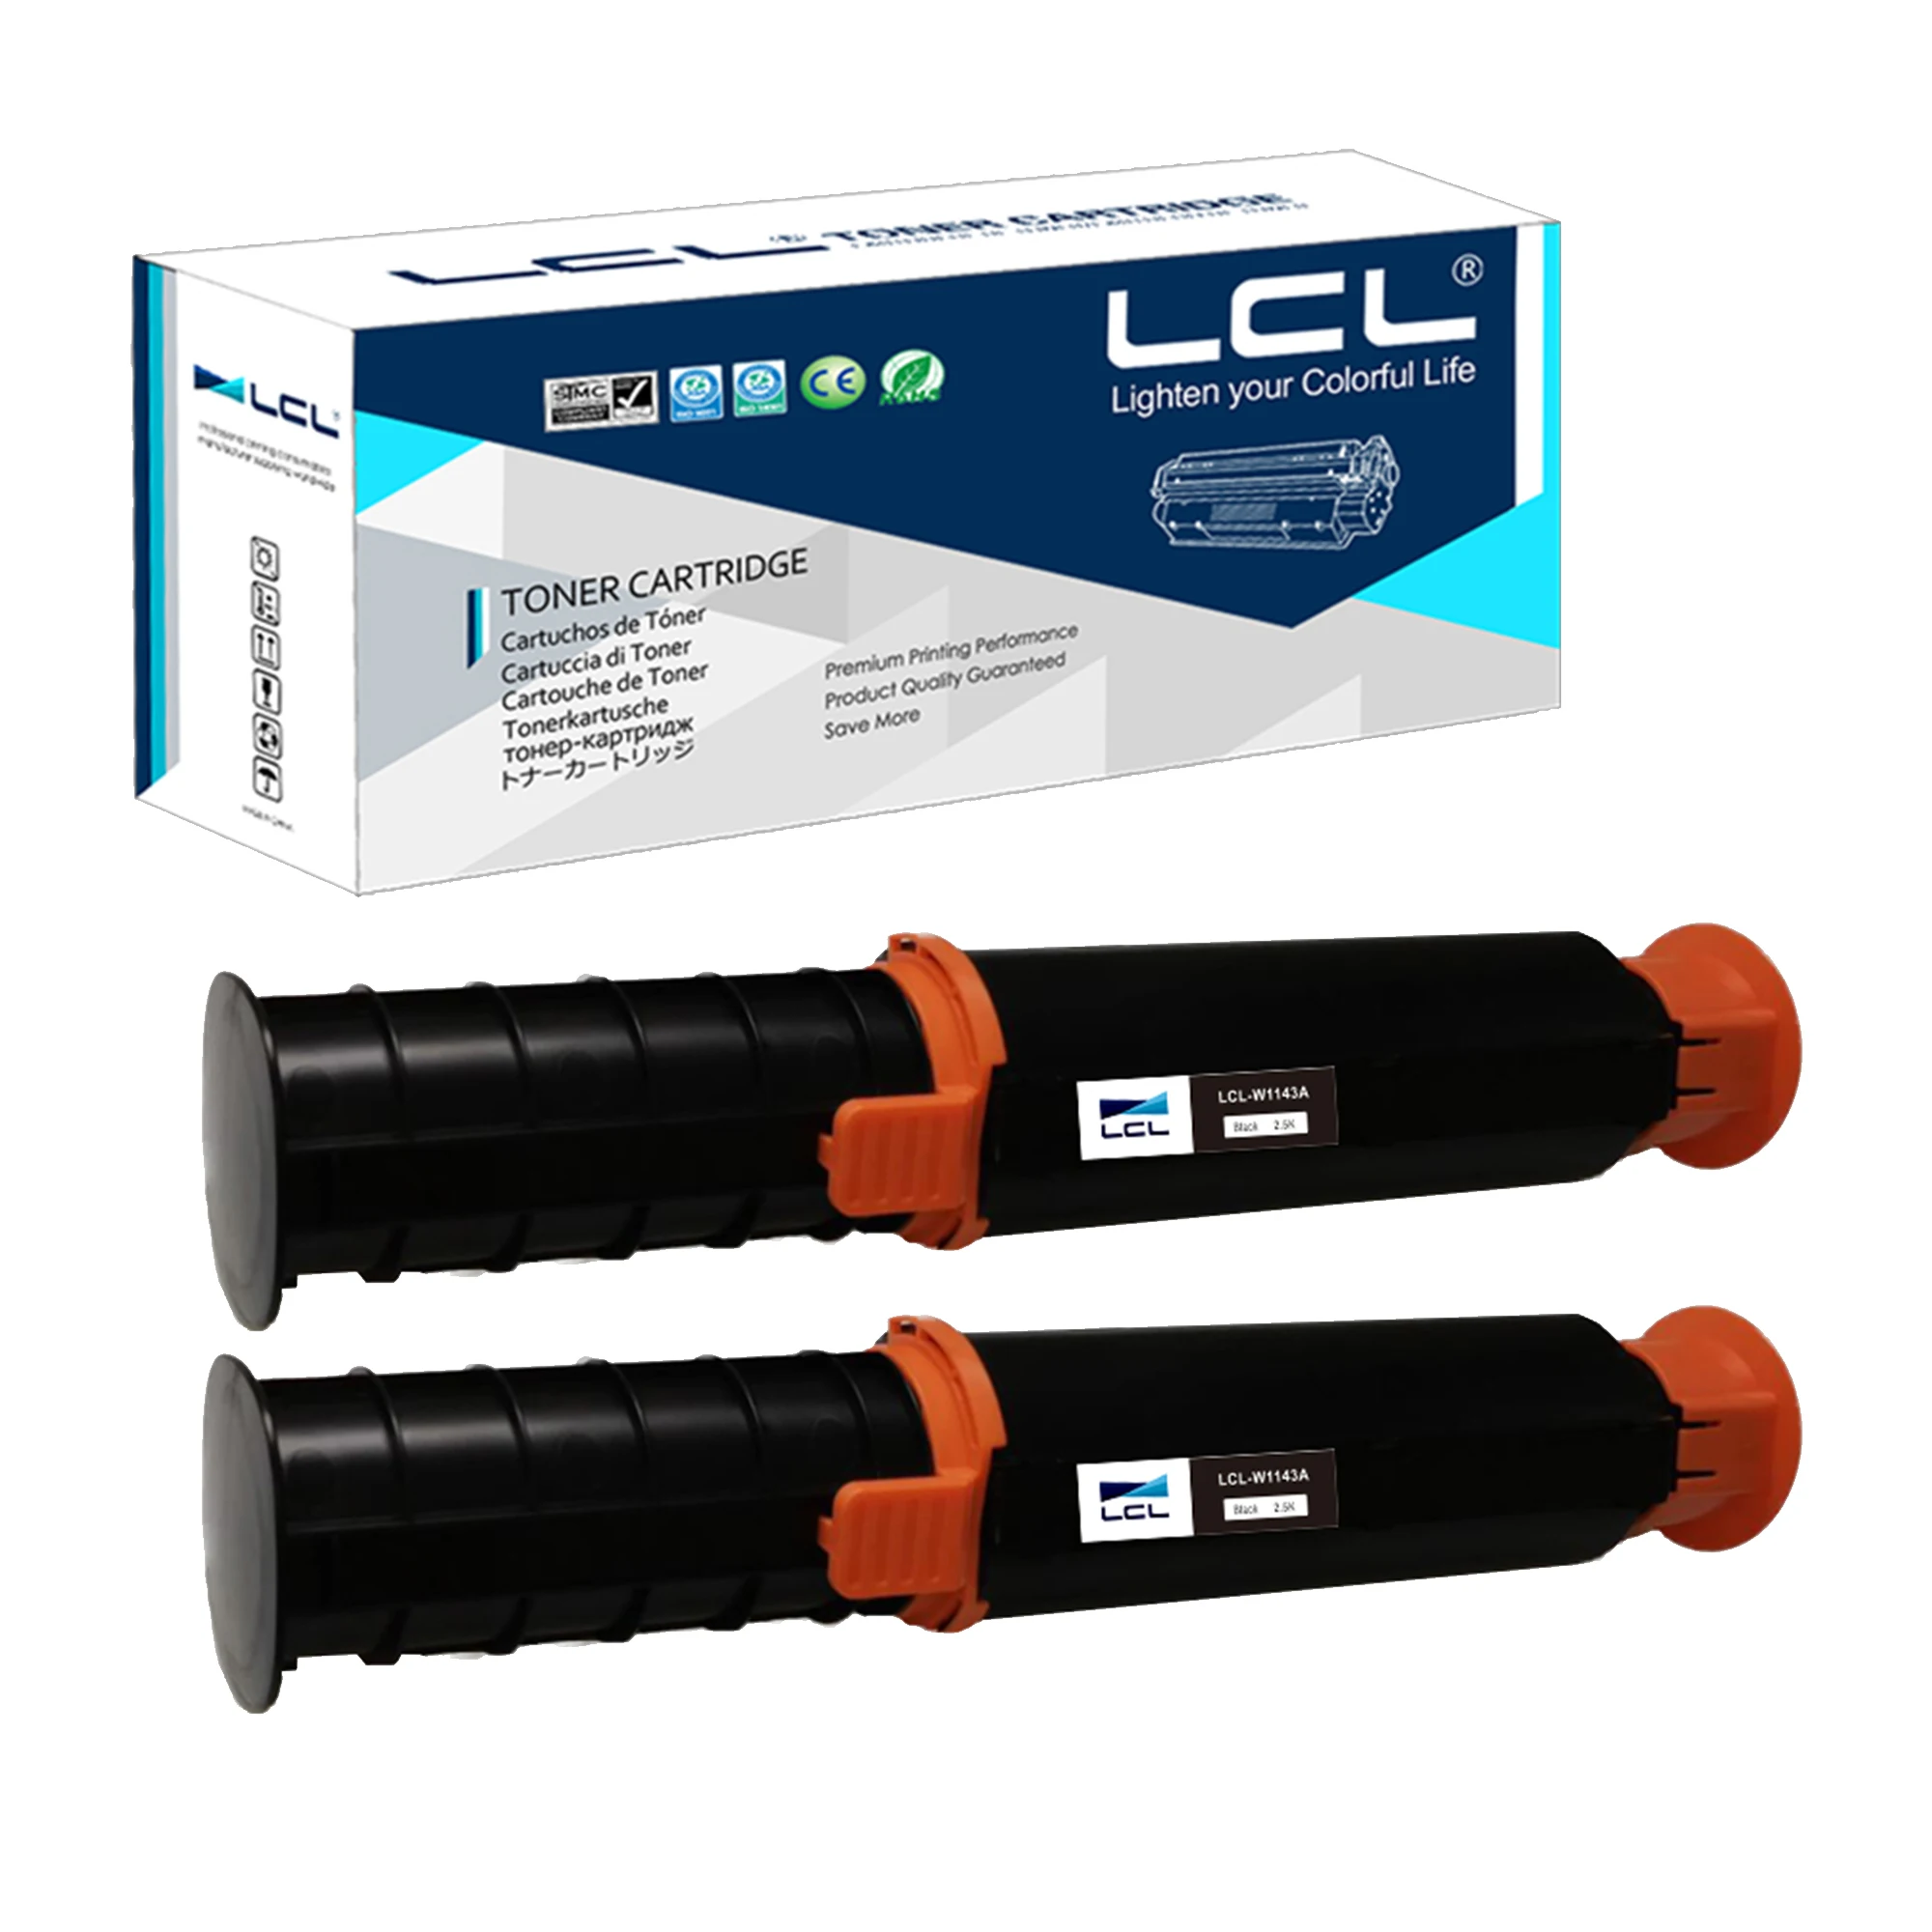 

LCL 143A W1143A W1143AD (2-Pack,Black) Toner Cartridge Compatible for HP Neverstop Laser MFP 1201n 1202w 1202nw, HP Neverstop